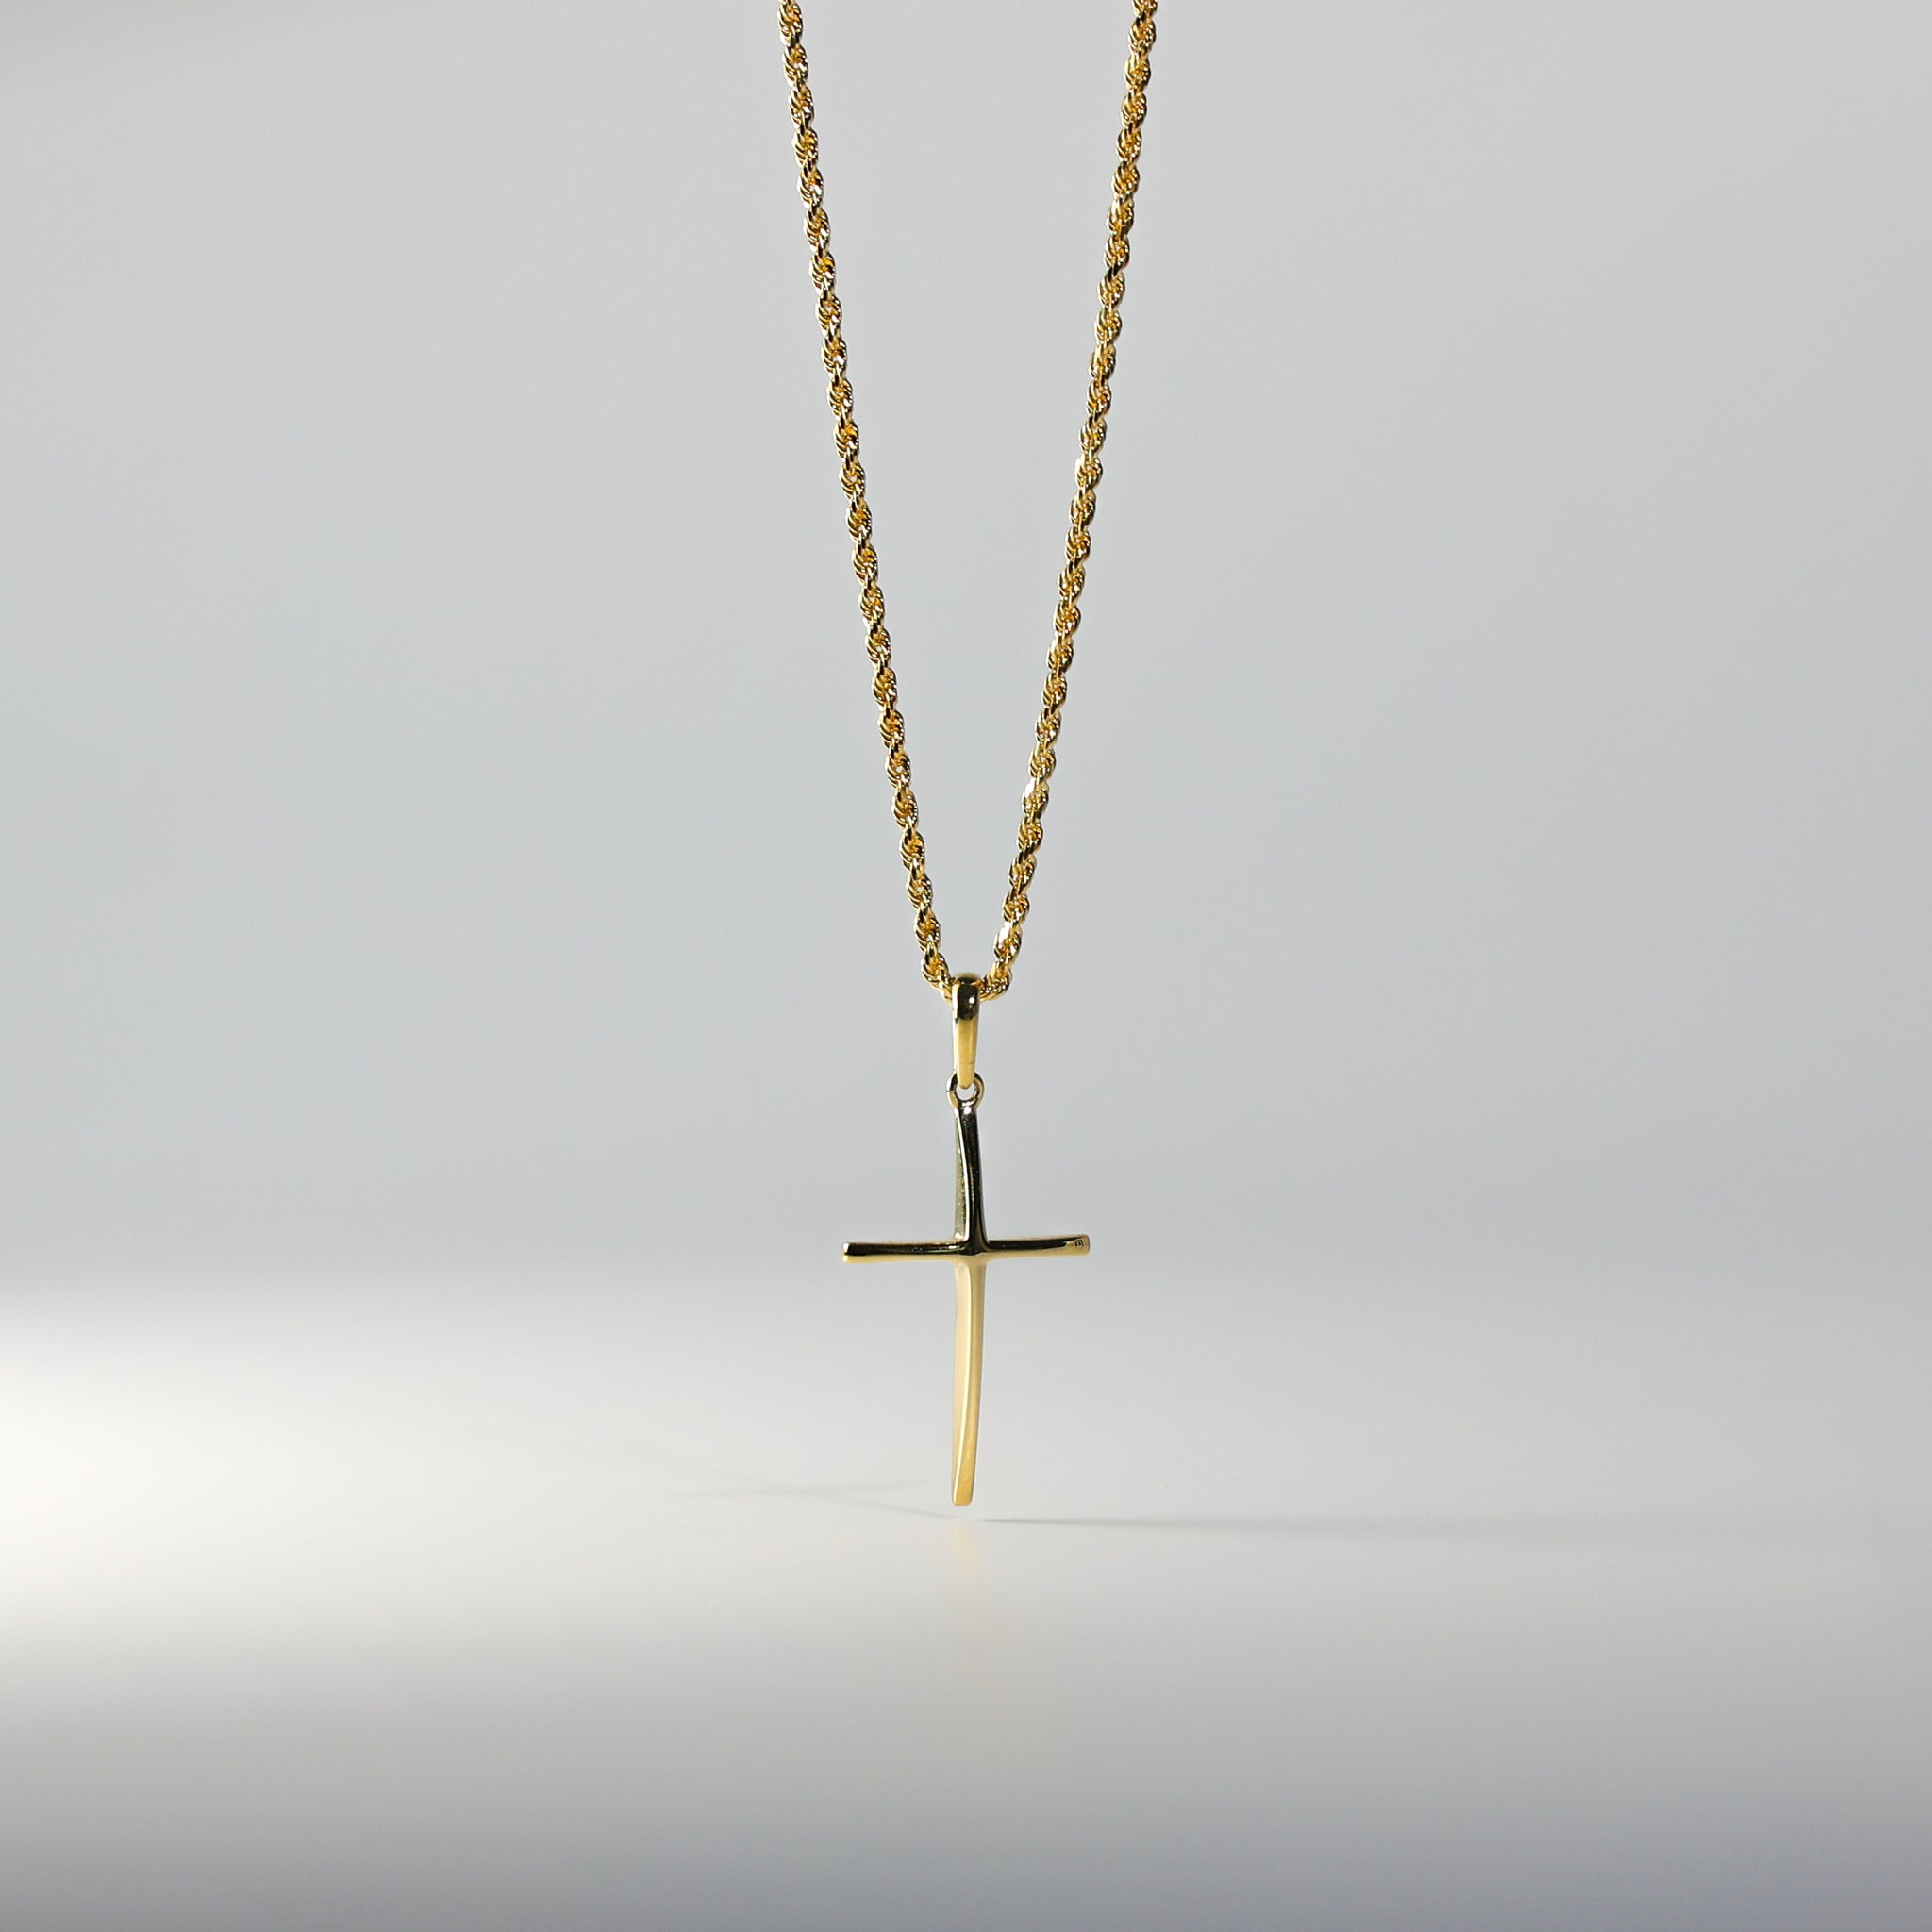 Dainty Gold Classic Cross Religious Pendant - Charlie & Co. Jewelry